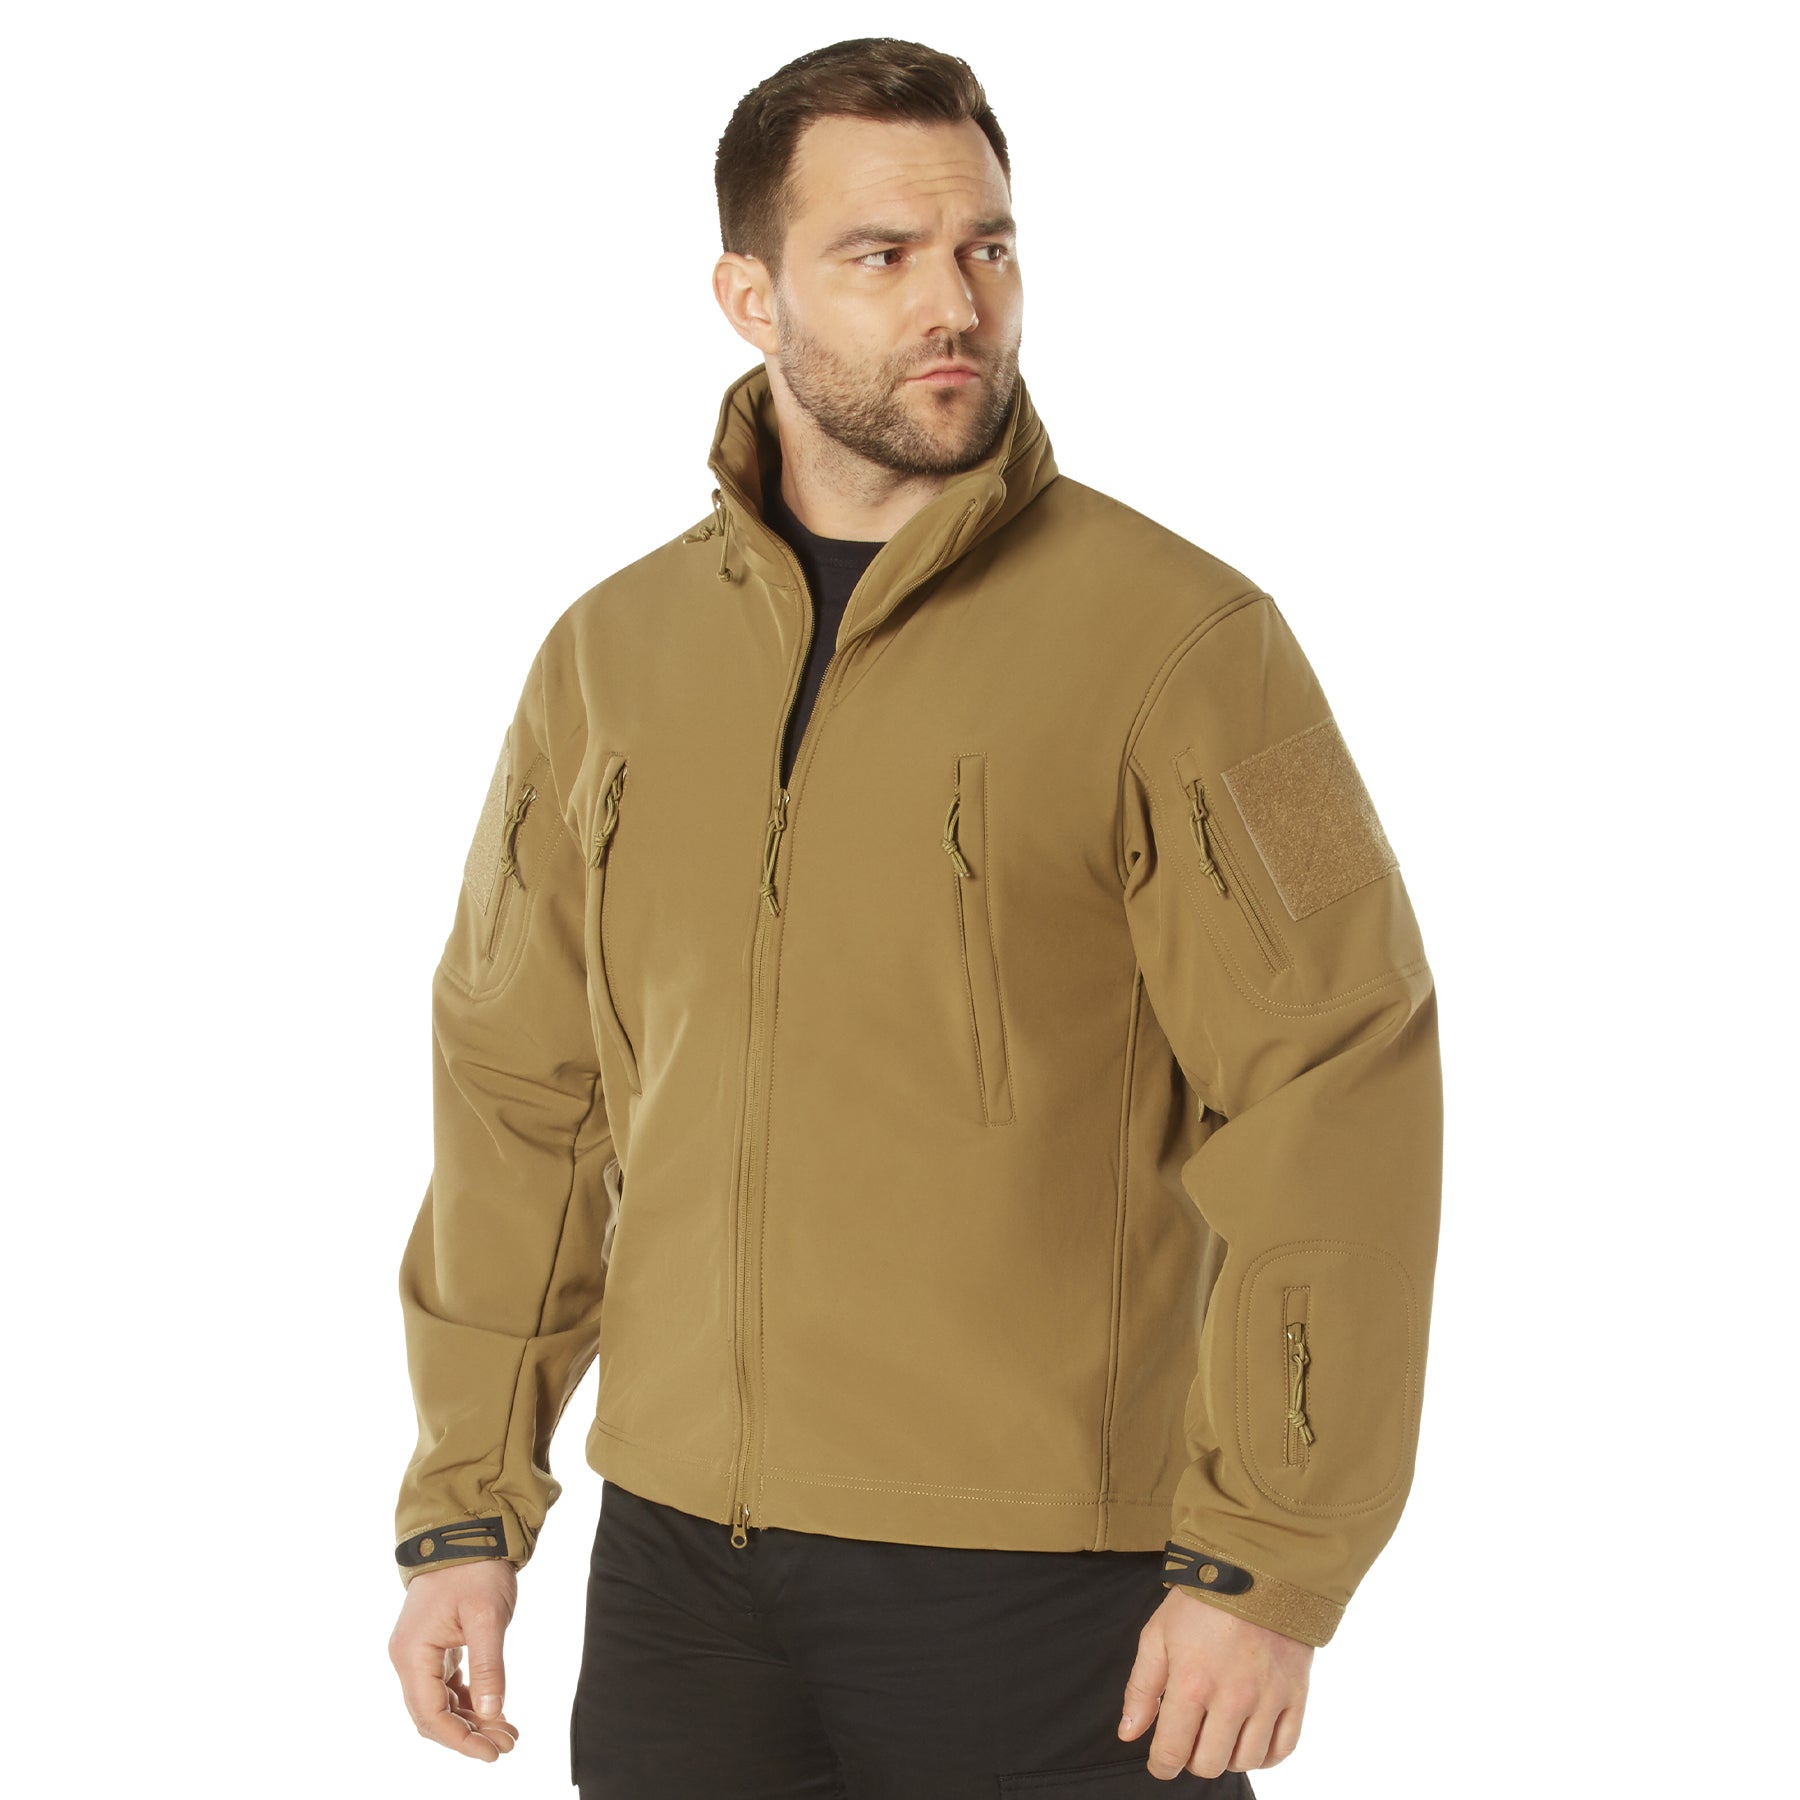 Poly Spec Ops Tactical Soft Shell Jackets Coyote Brown